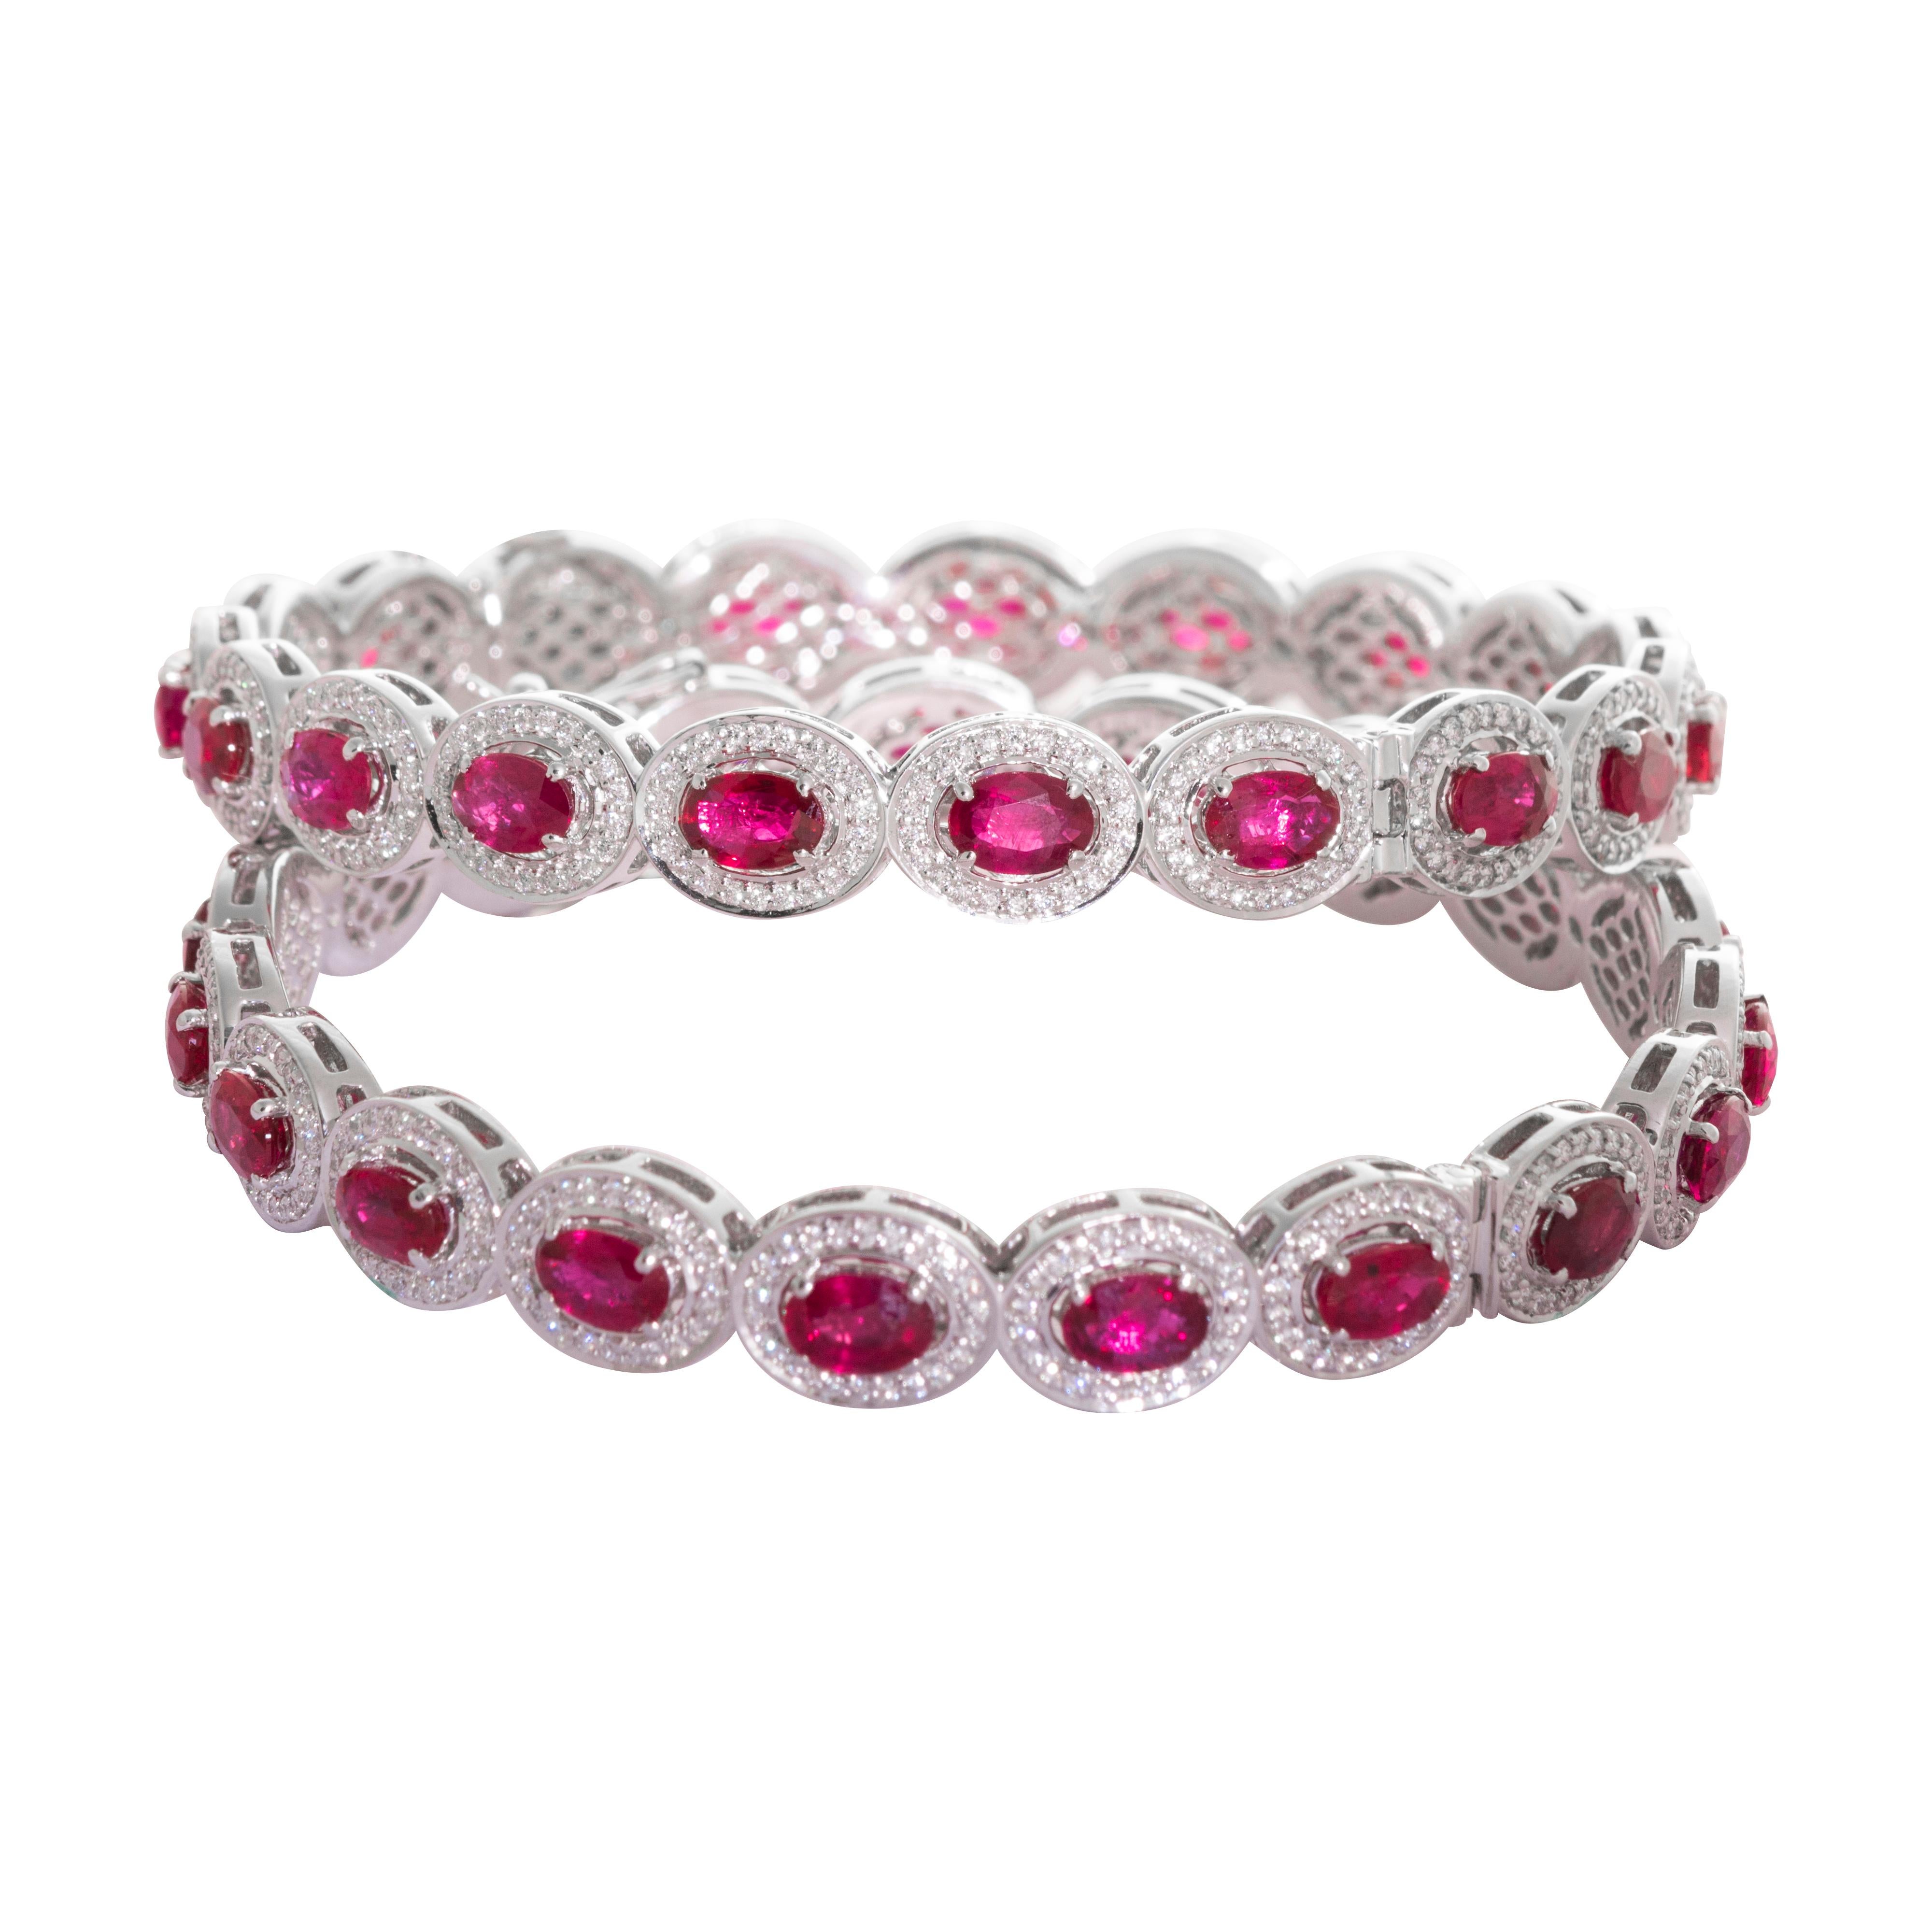 Pair of 18 Karat White Gold Ruby Diamond Bangle Bracelets

Set in 18 Karat white gold and studded with white diamonds (VVS Purity) and beautiful red rubies, these bangle bracelets are perfect for evening wear.

The bangle diameter is 2.37 inches but